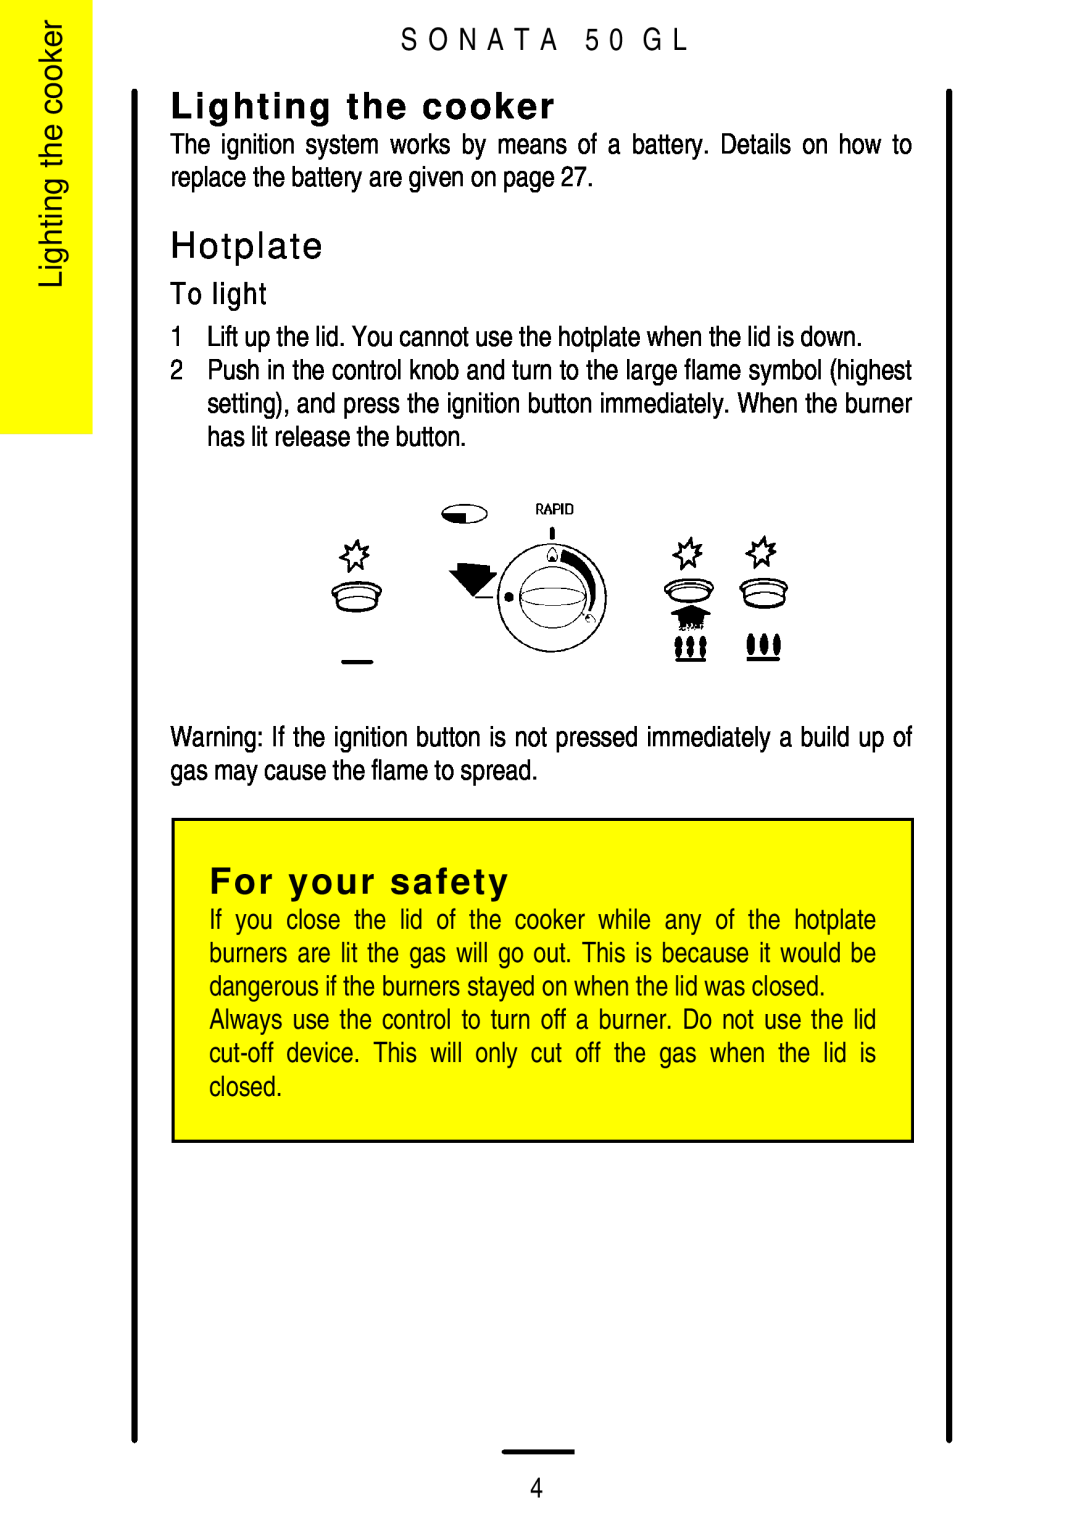 Electrolux installation instructions Lighting the cooker, Hotplate, To light, For your safety, S O N A T A 5 0 G L 